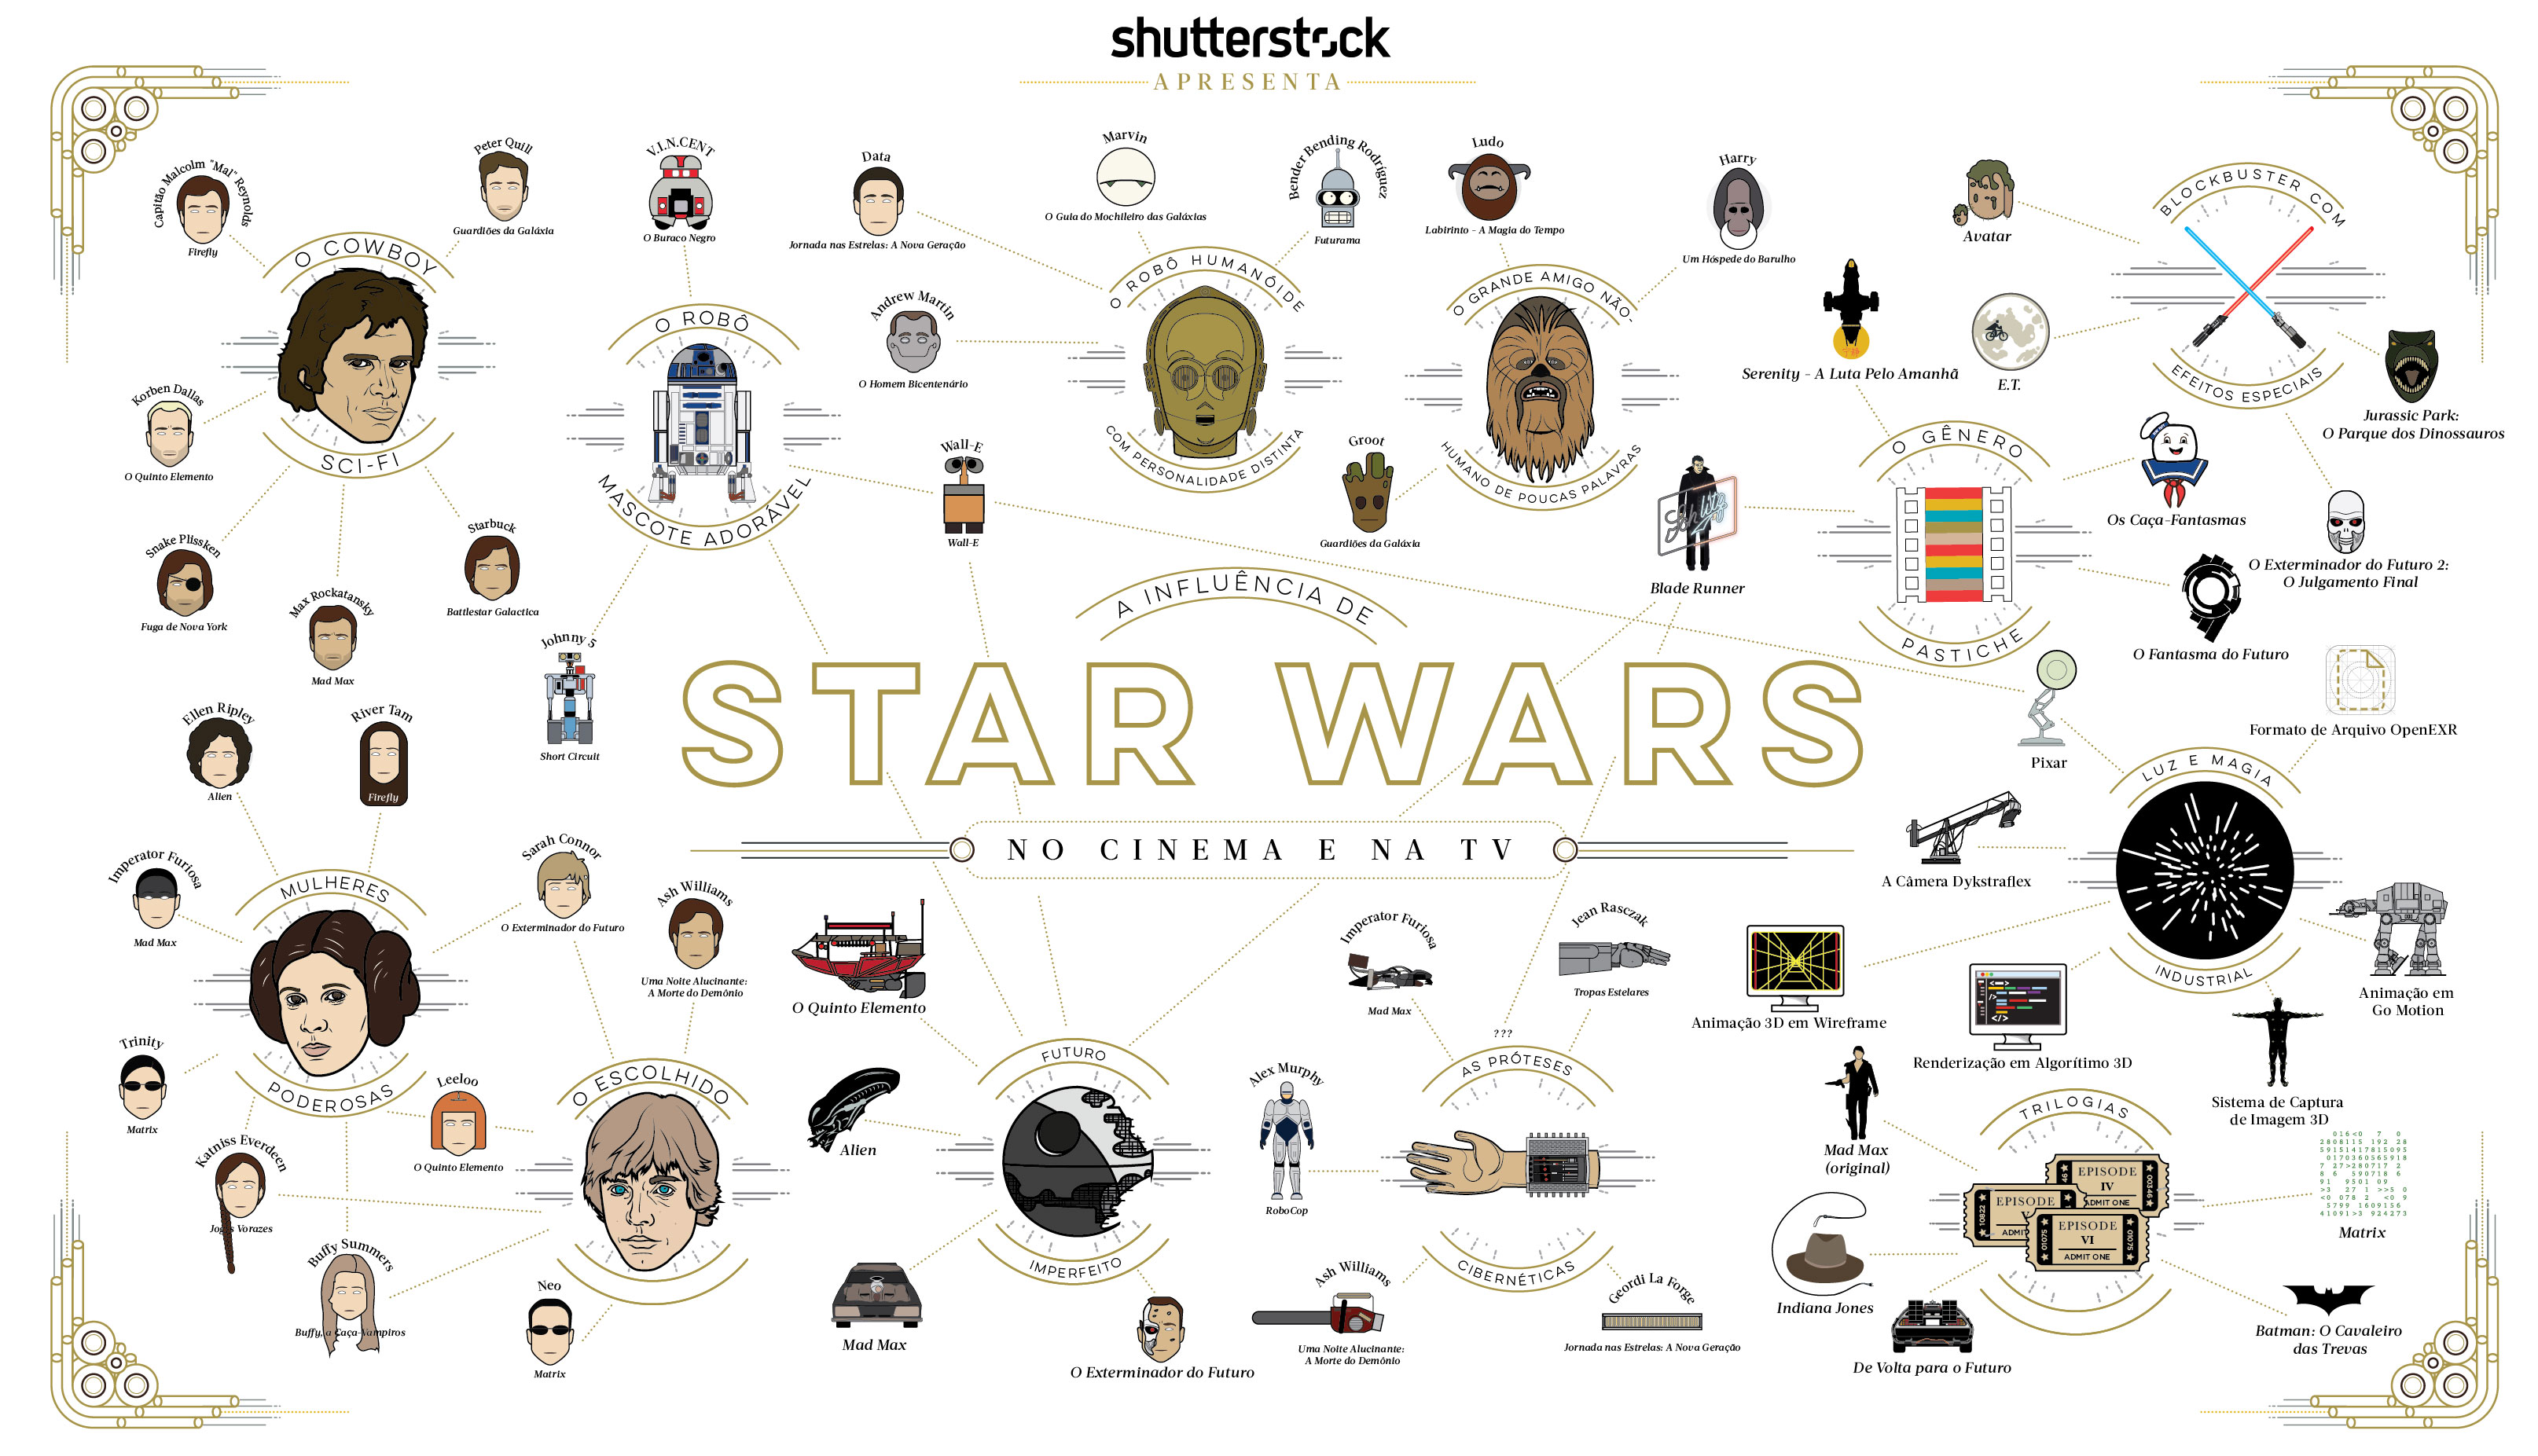 The-Influence-of-Star-Wars-PT